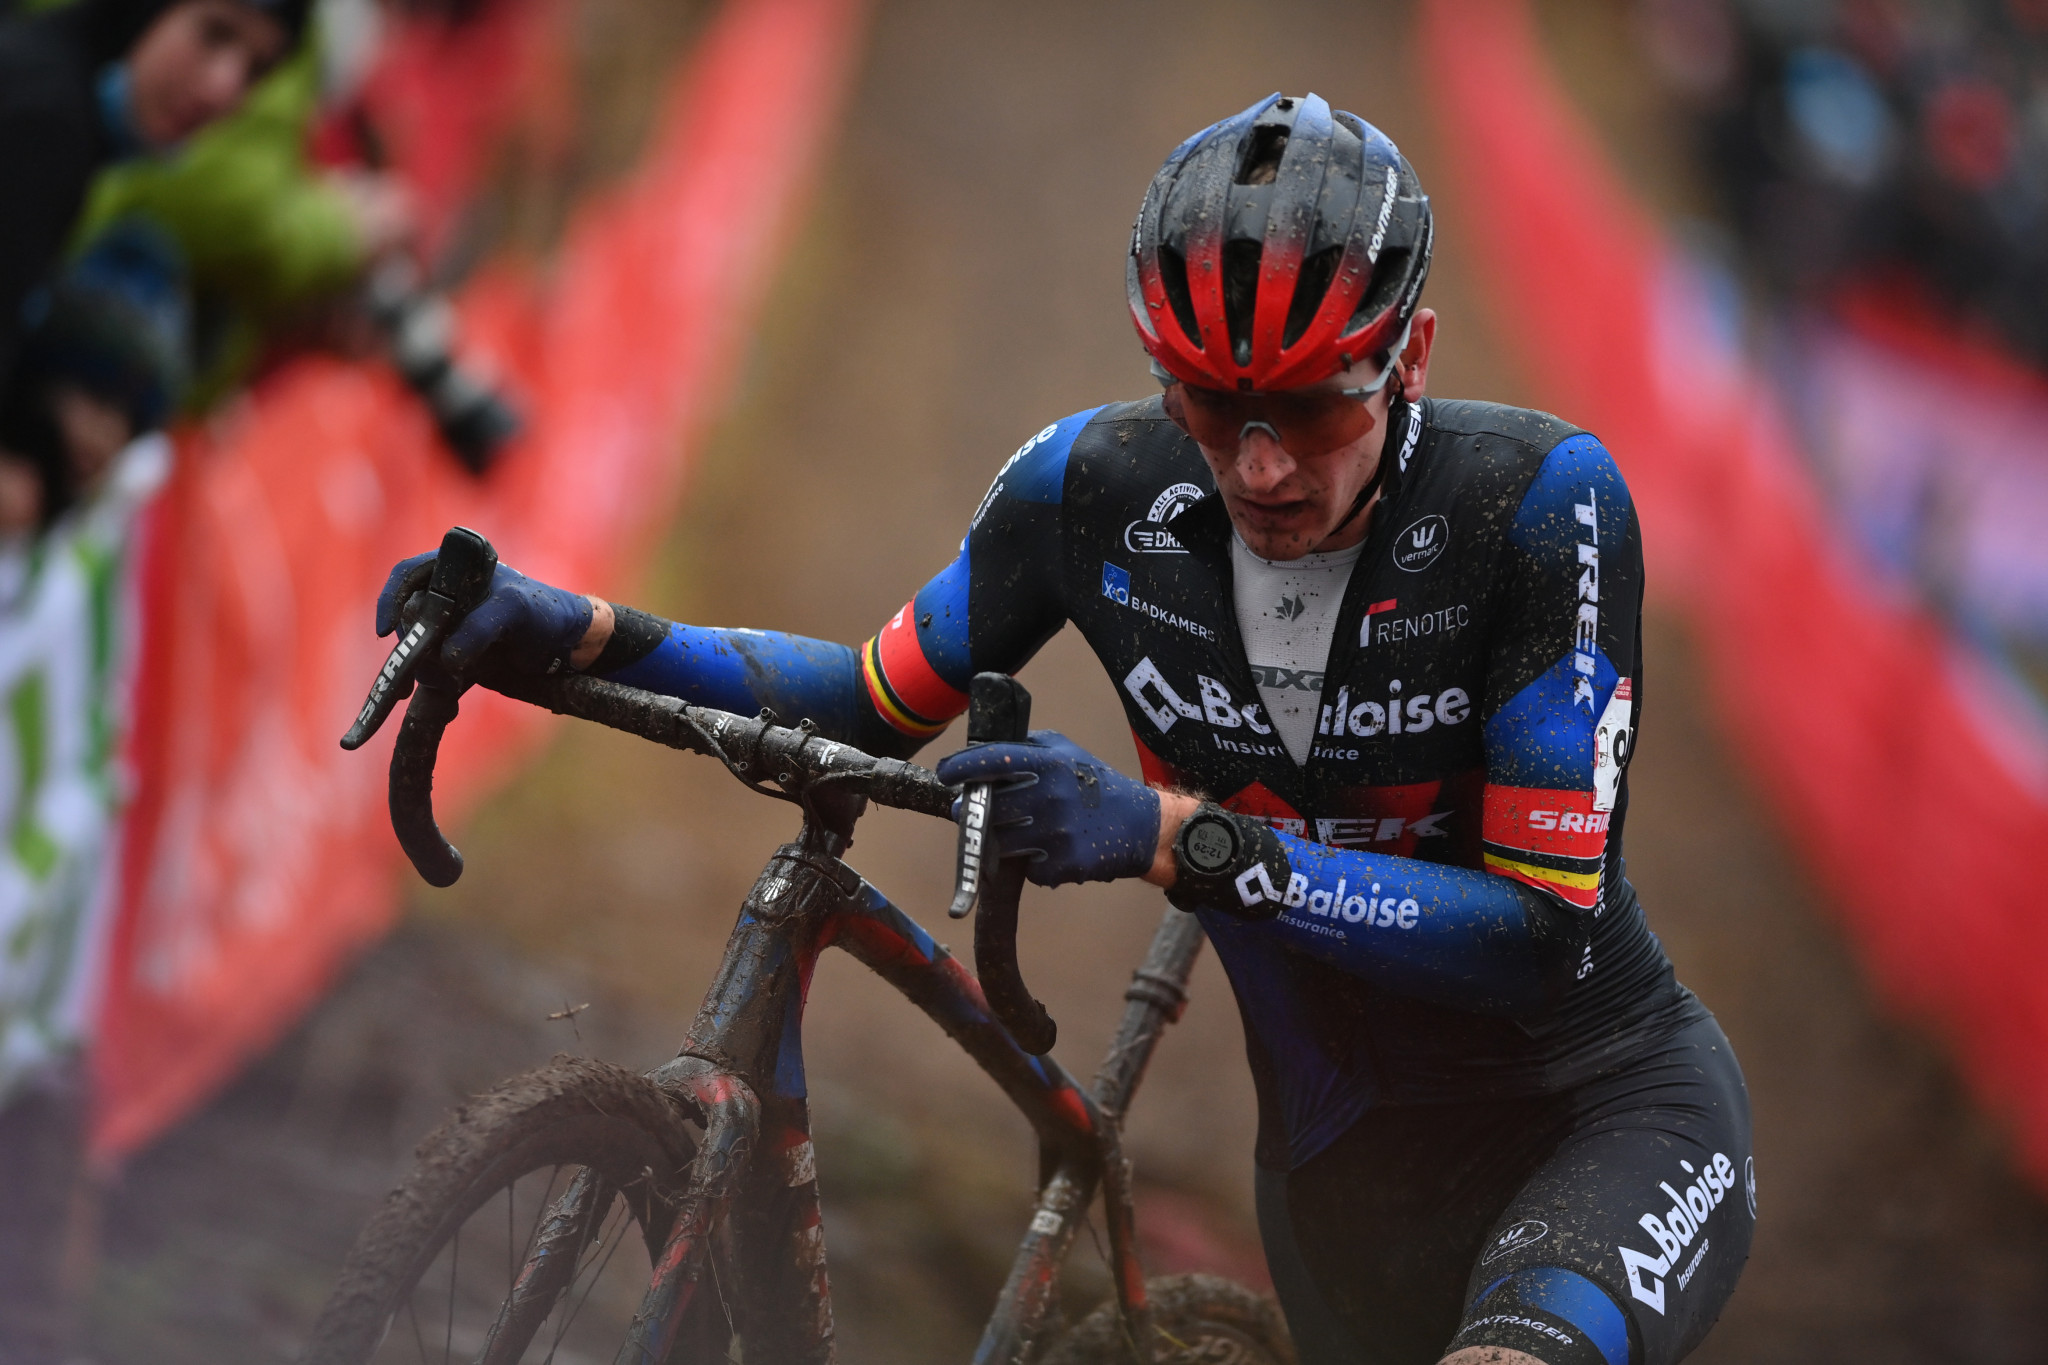 Toon Aerts is to be given a two-year ban ©Getty Images